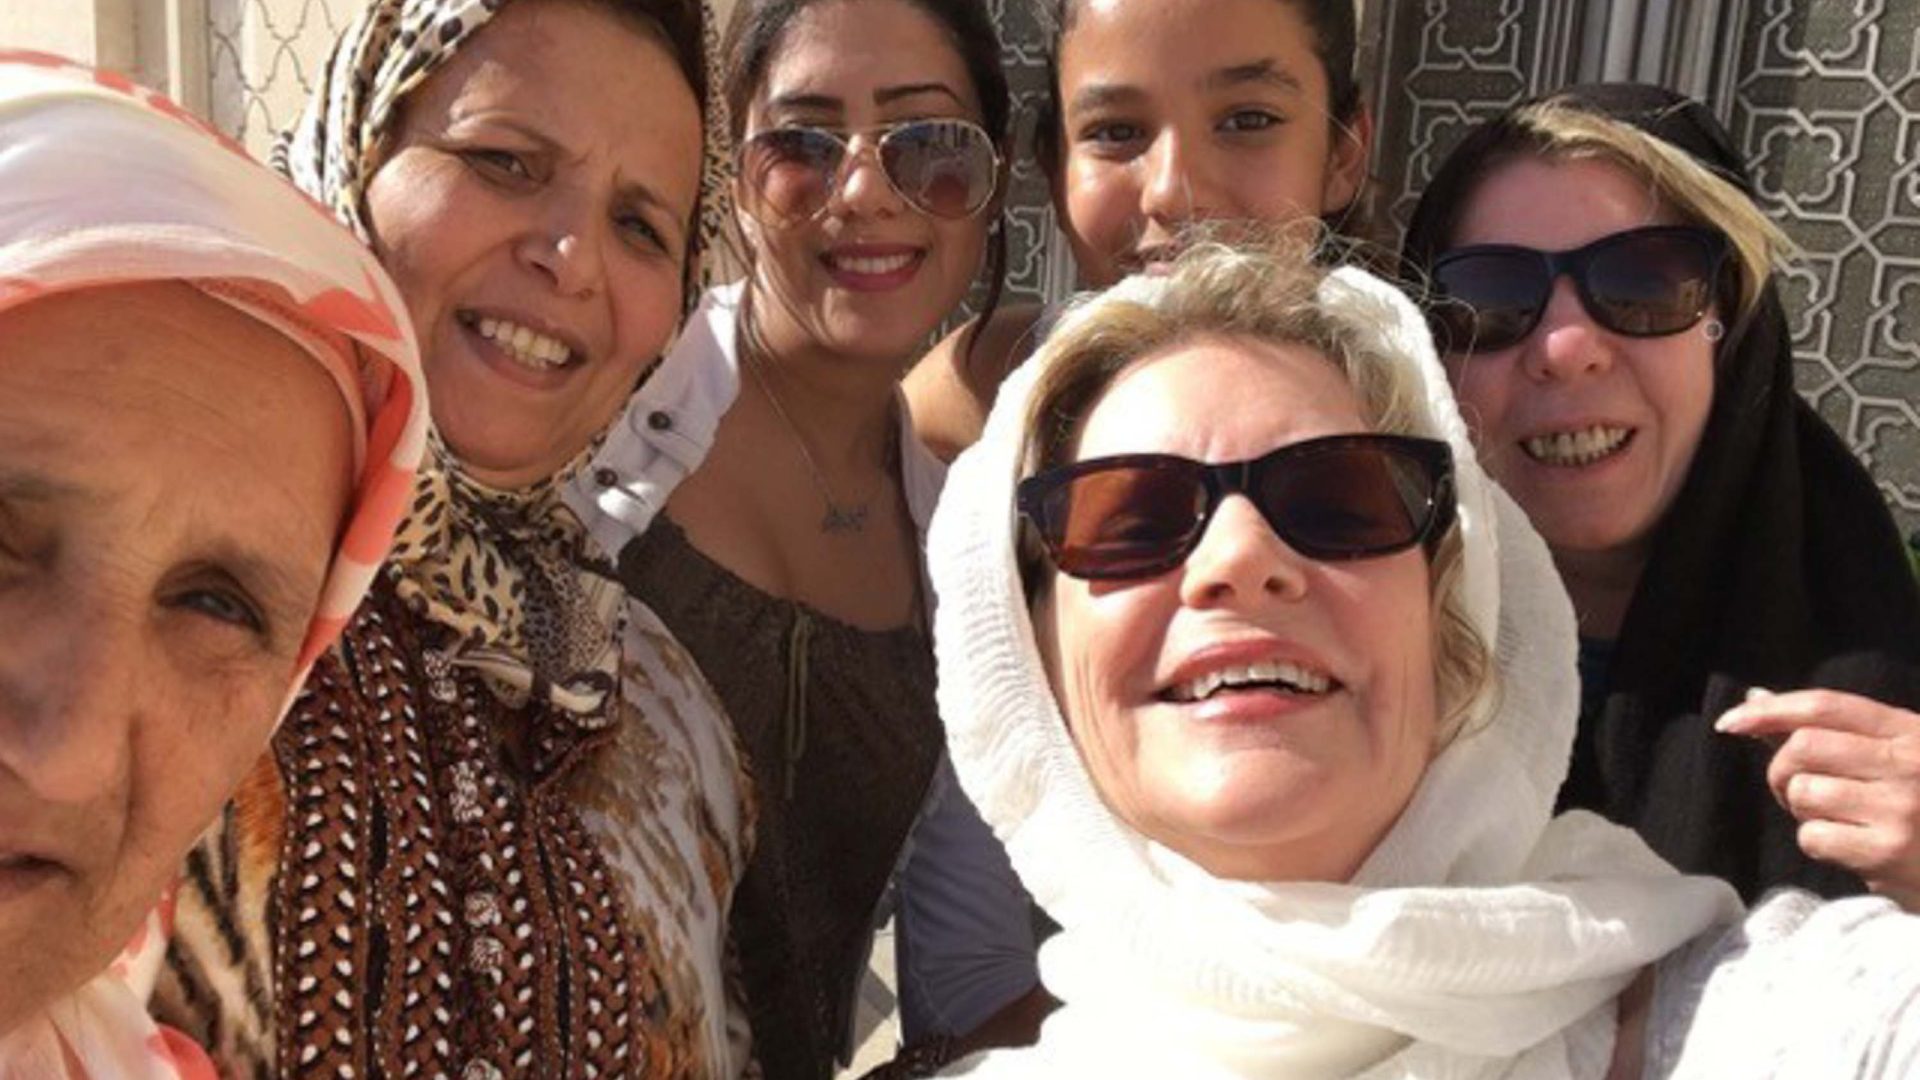 Jan, Sharon and other friends gather in Morocco for a selfie.